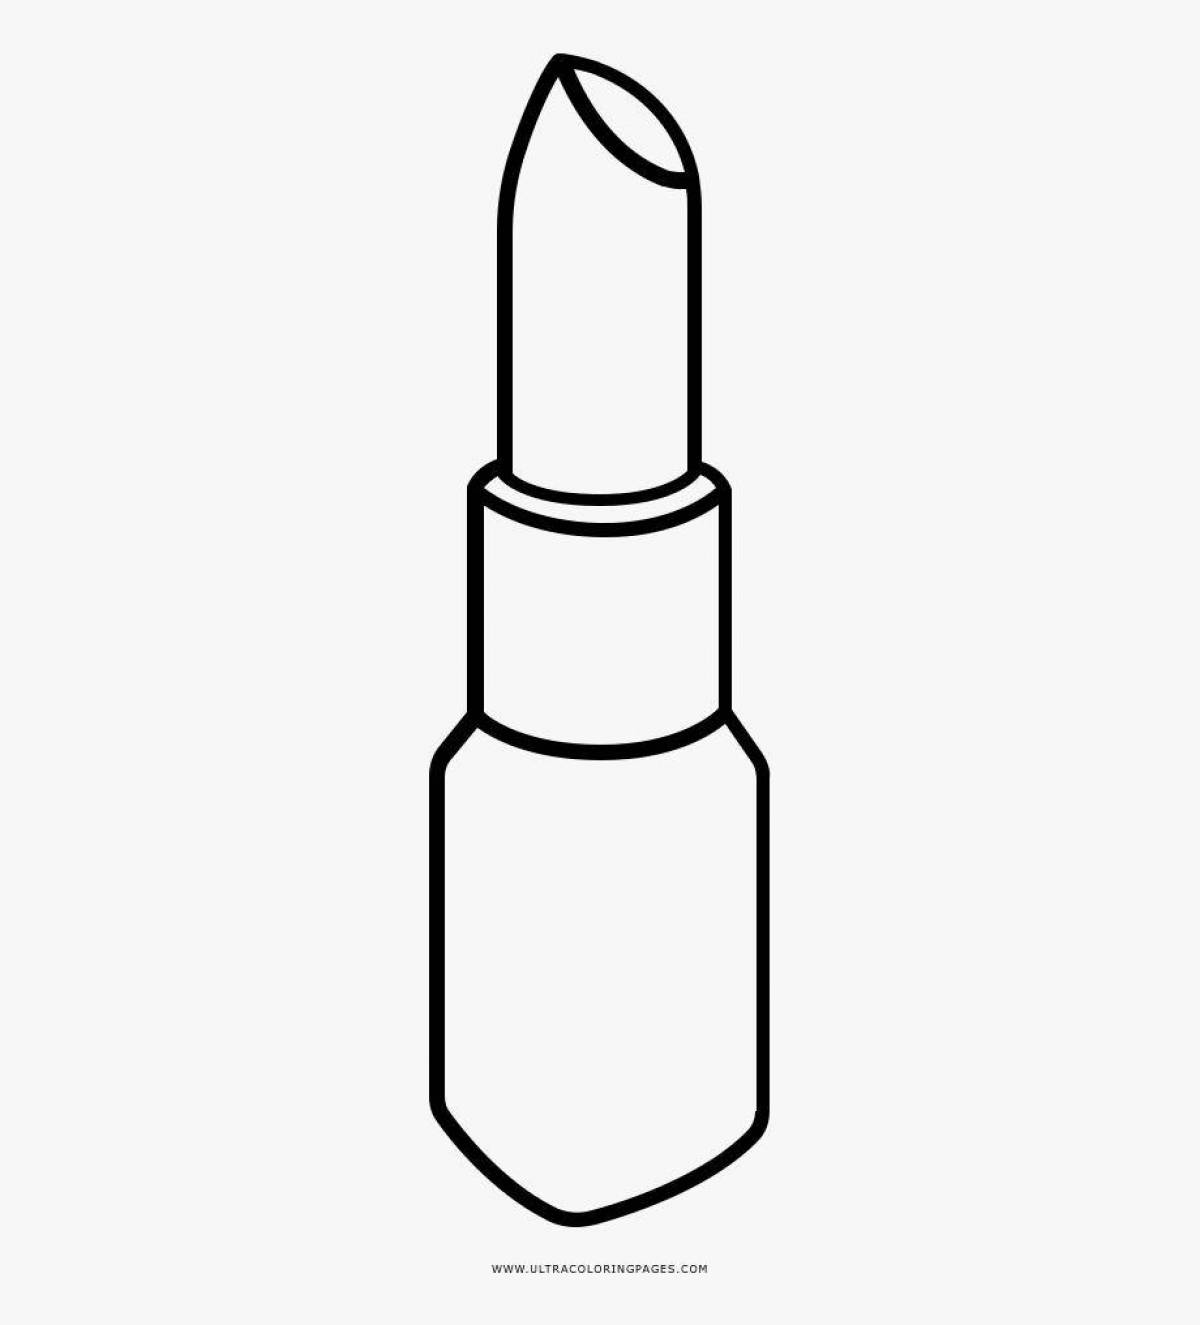 Adorable lipstick coloring book for kids